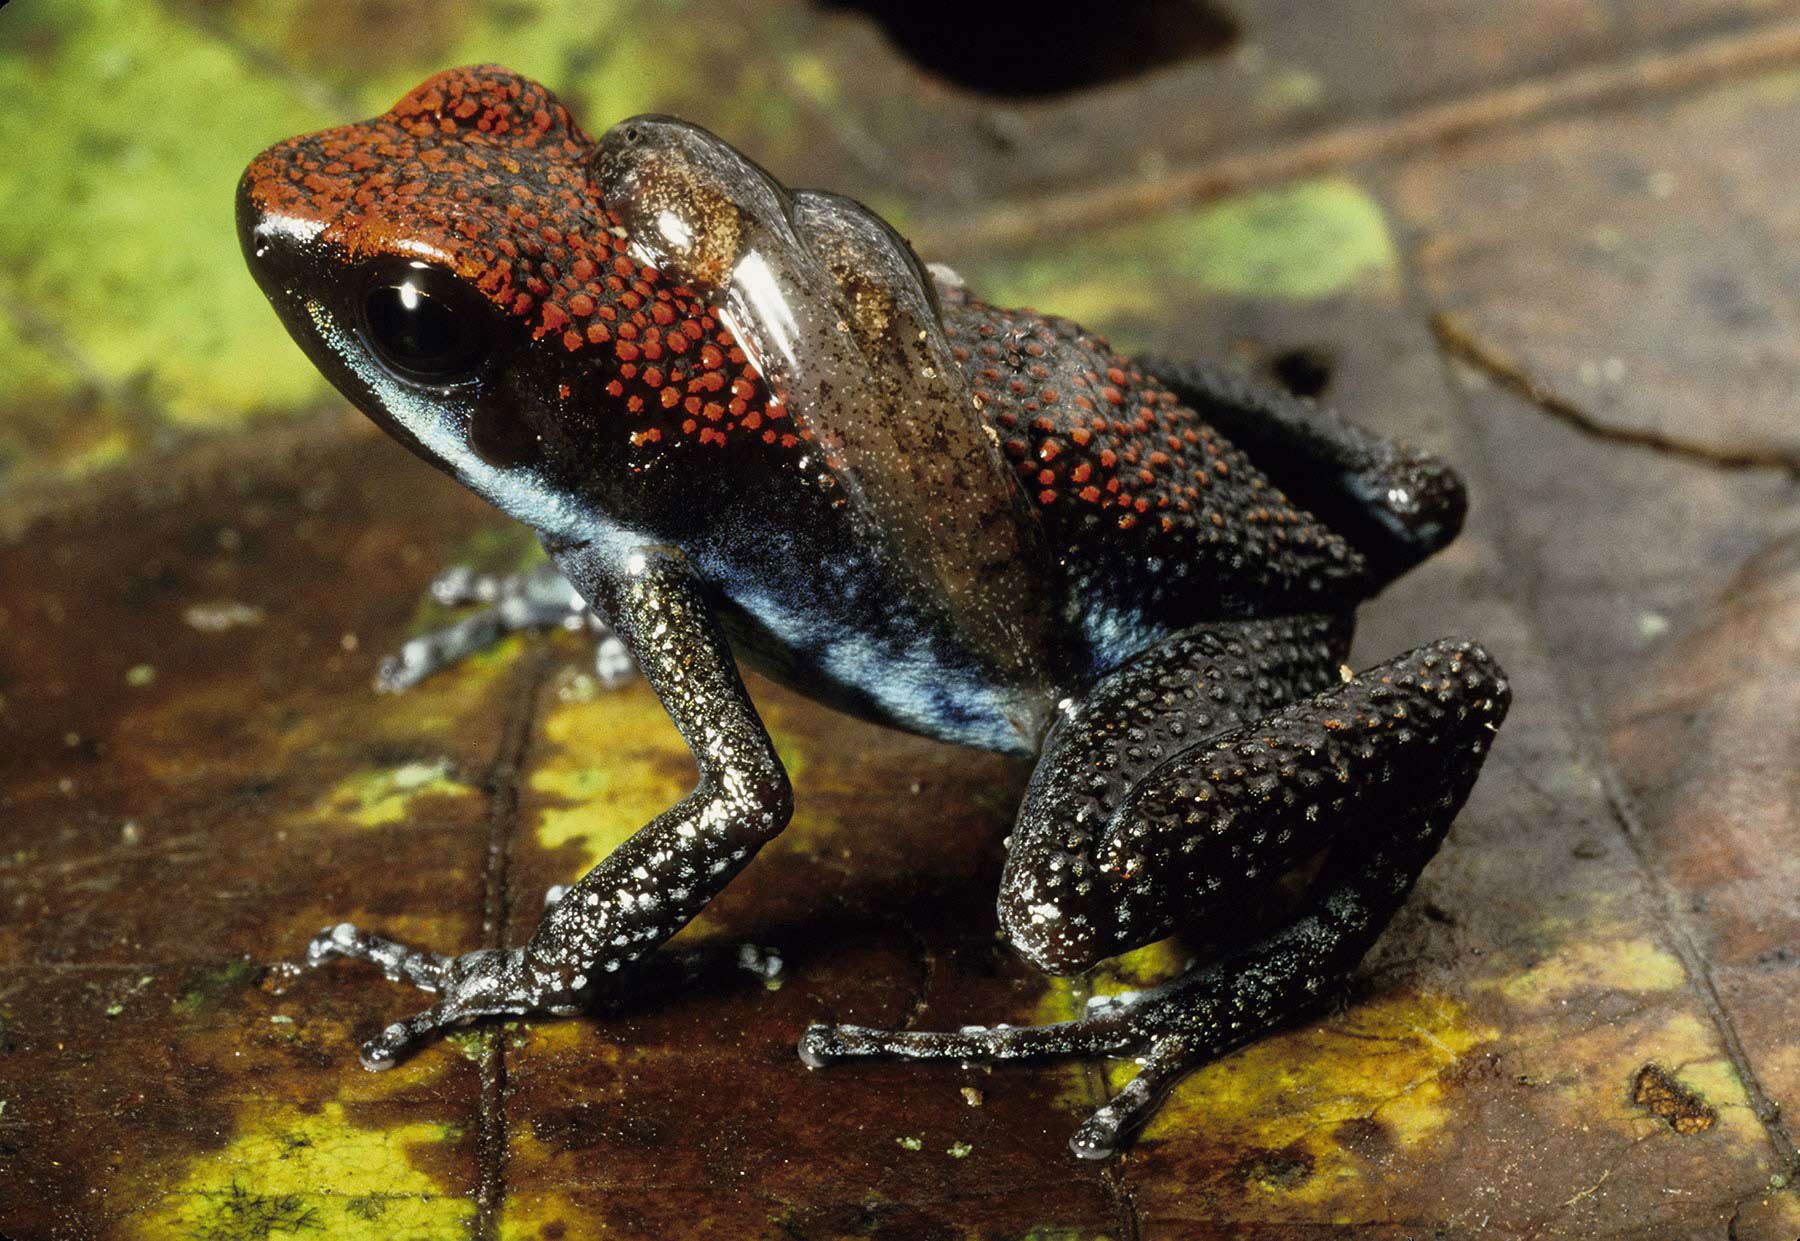 Breeding ecology of the poison dart frogs